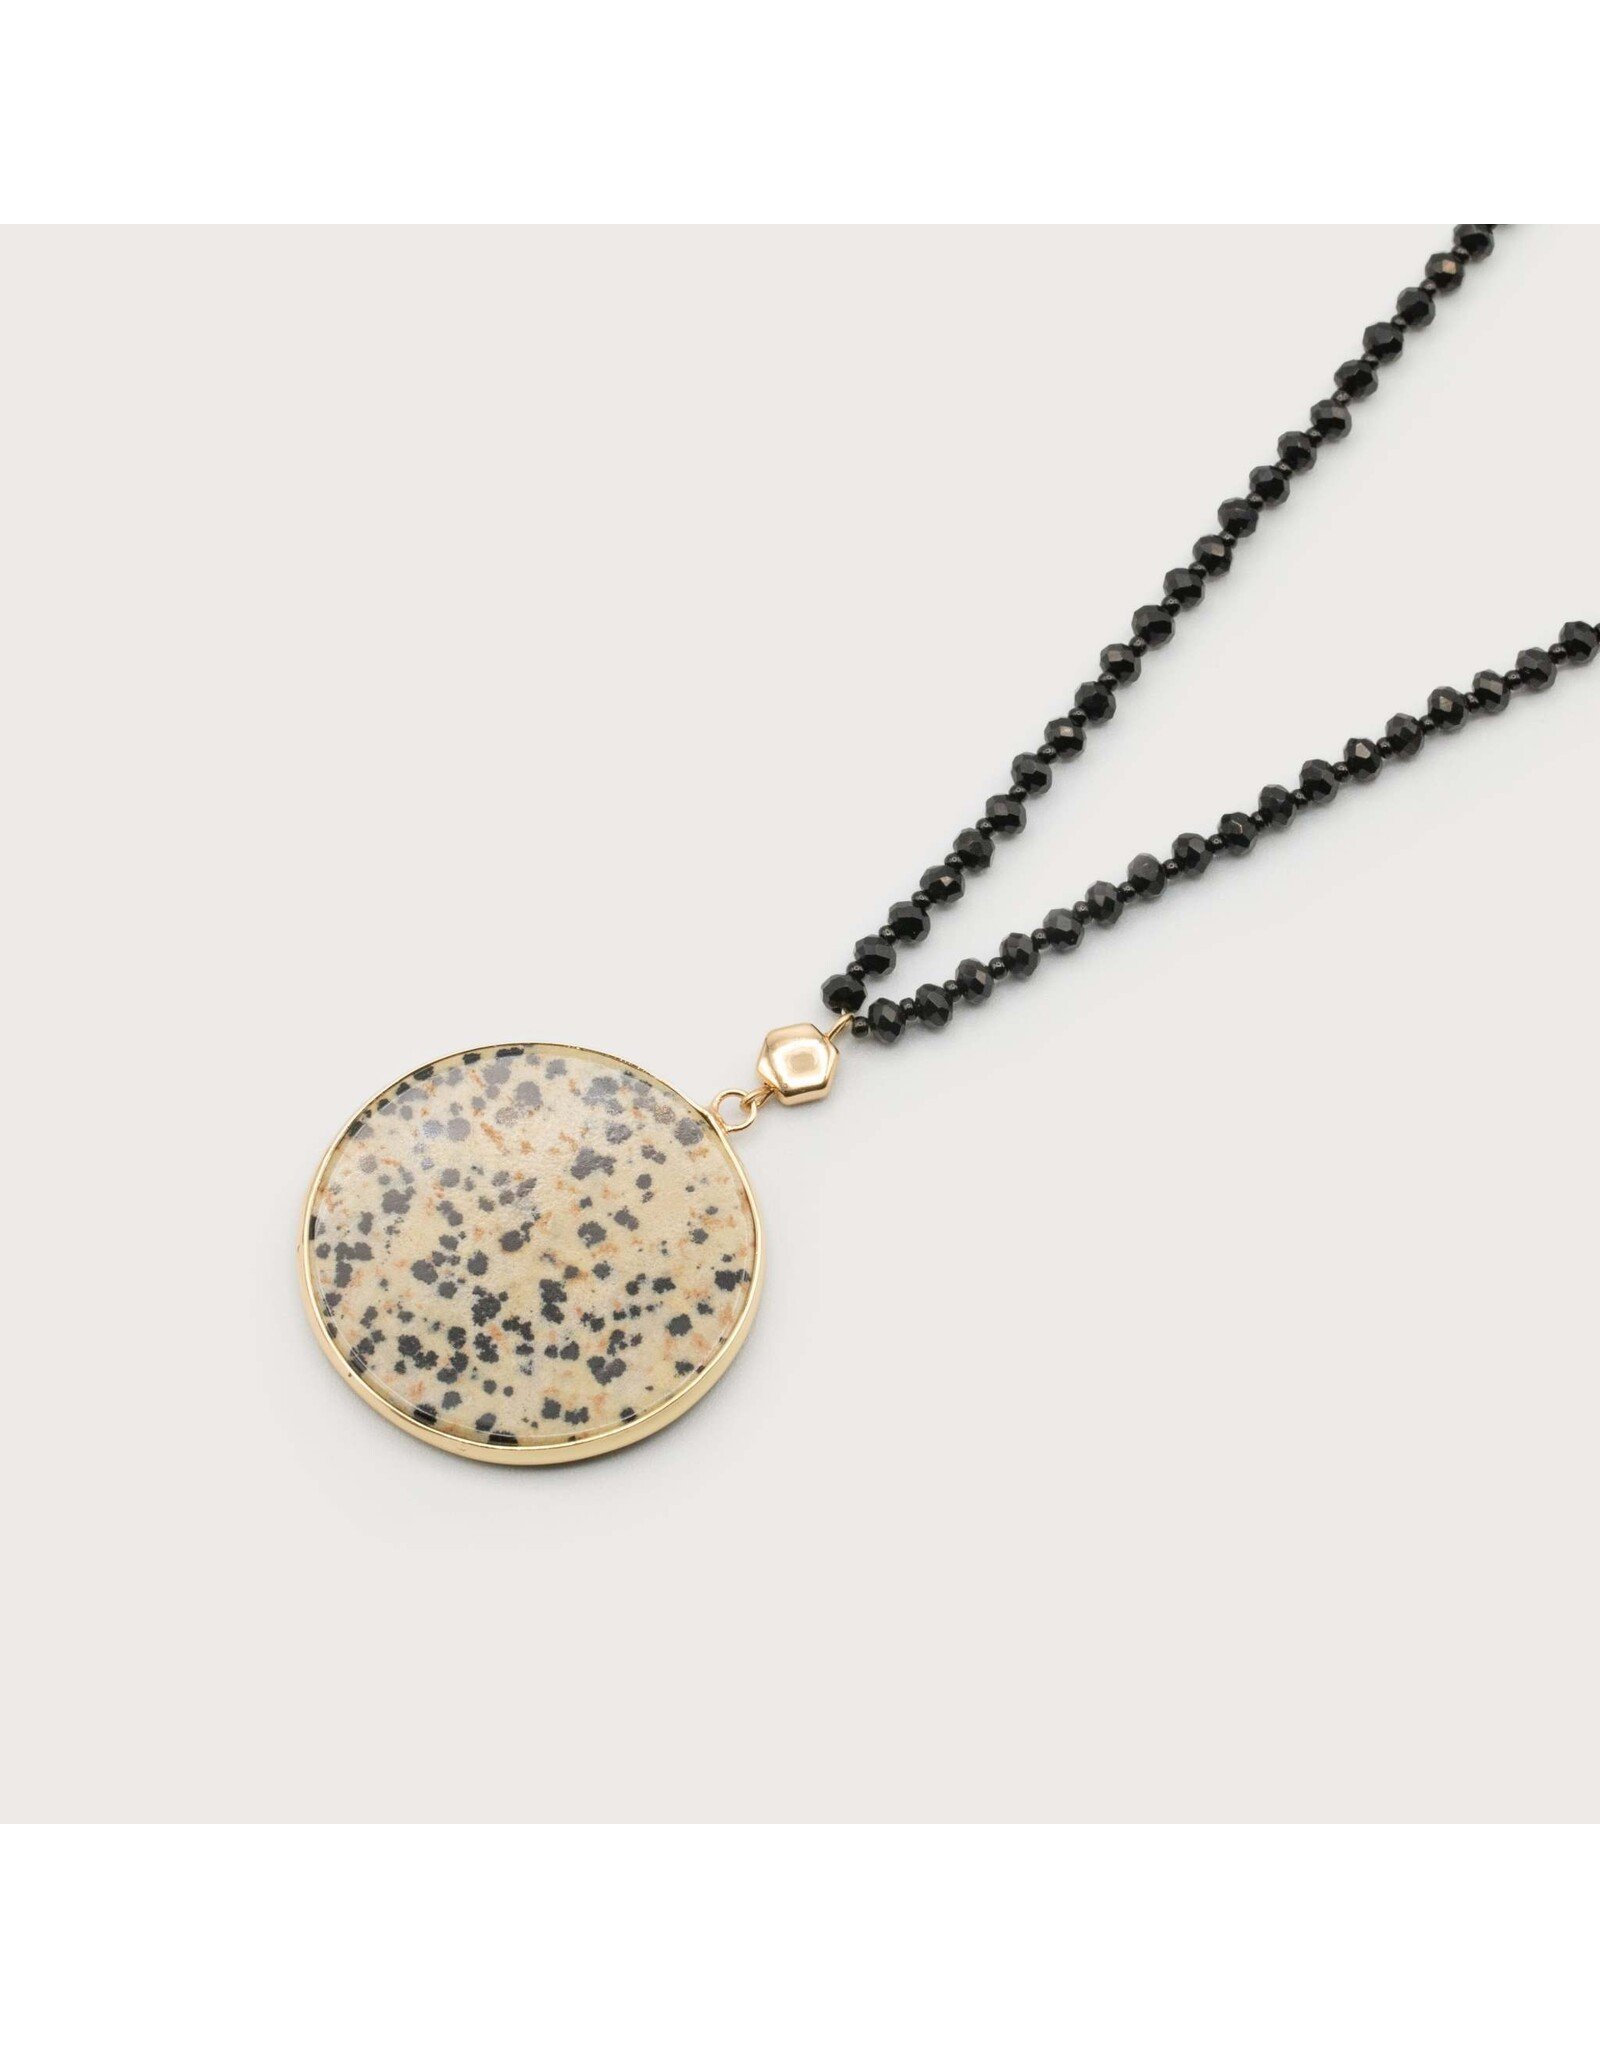 Long Natural Stone Pendant Necklace